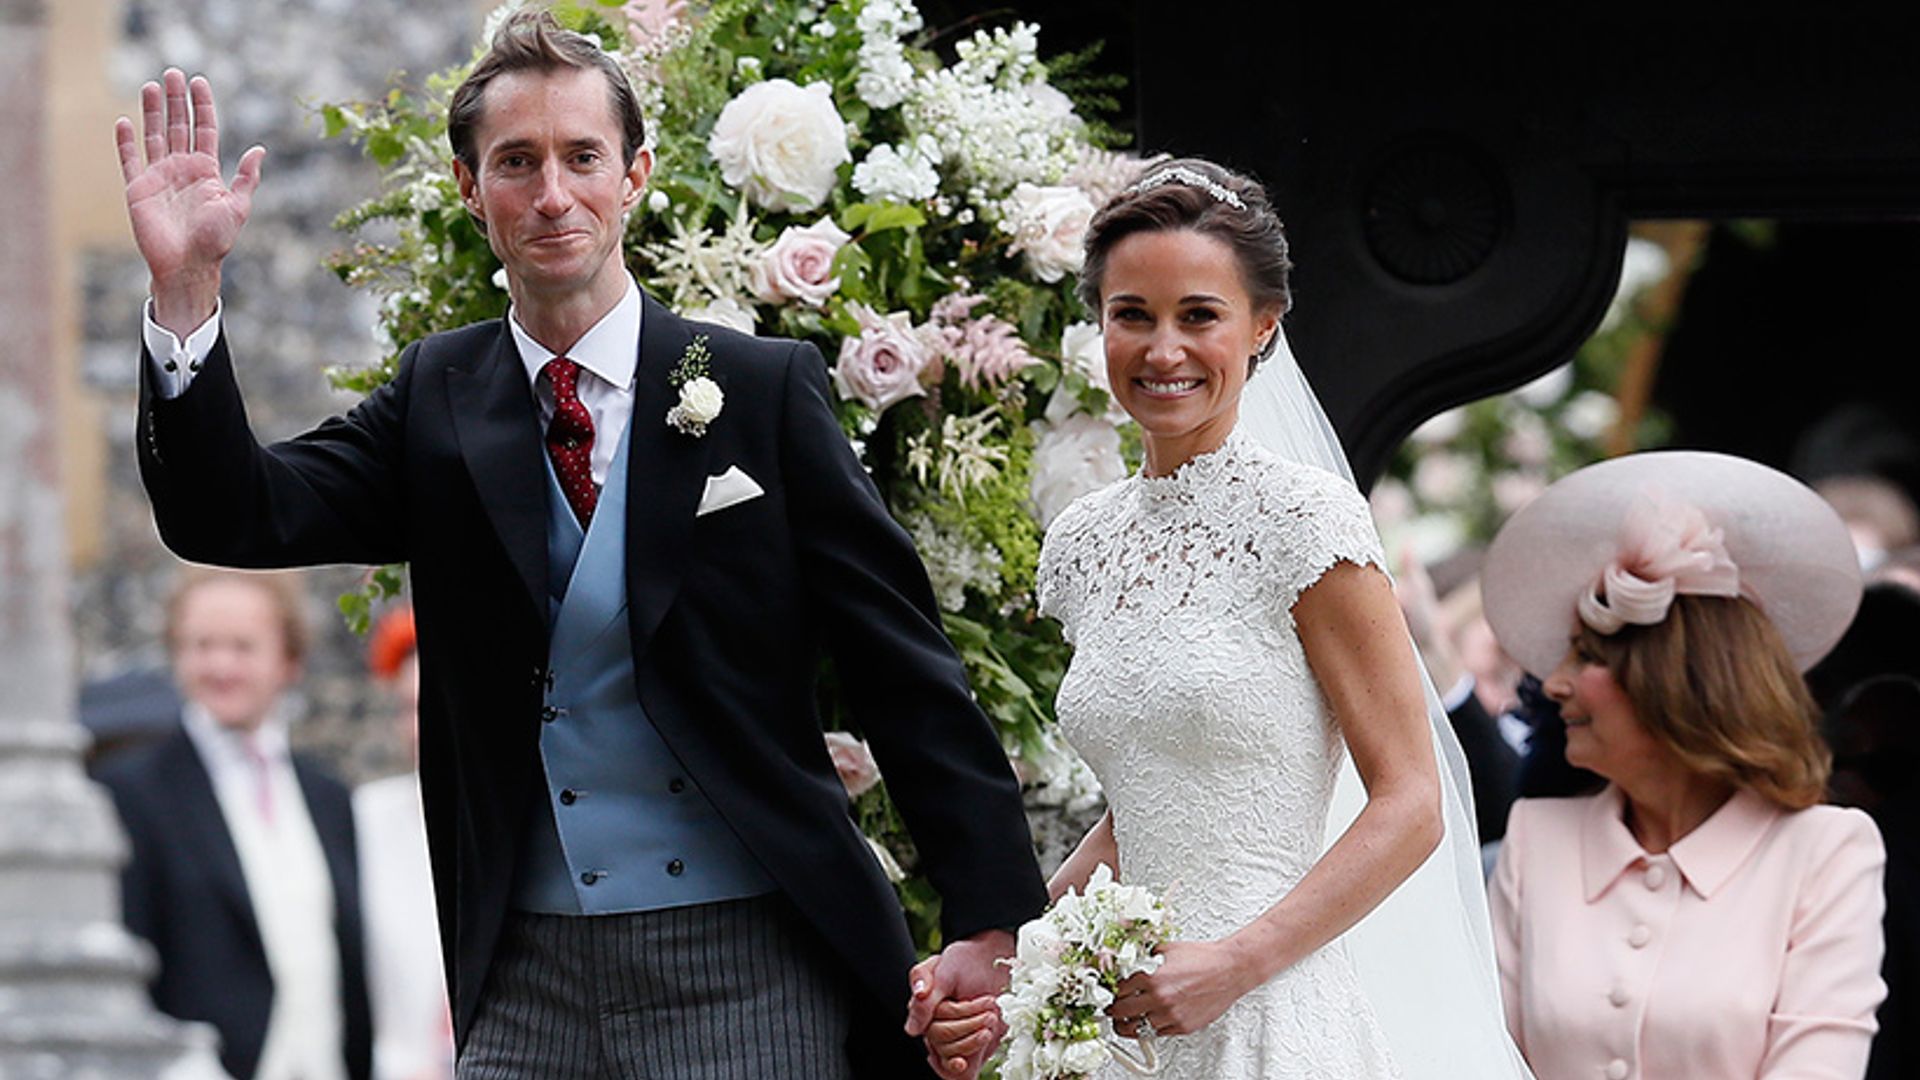 Pippa Middleton and James Matthews expecting first baby!